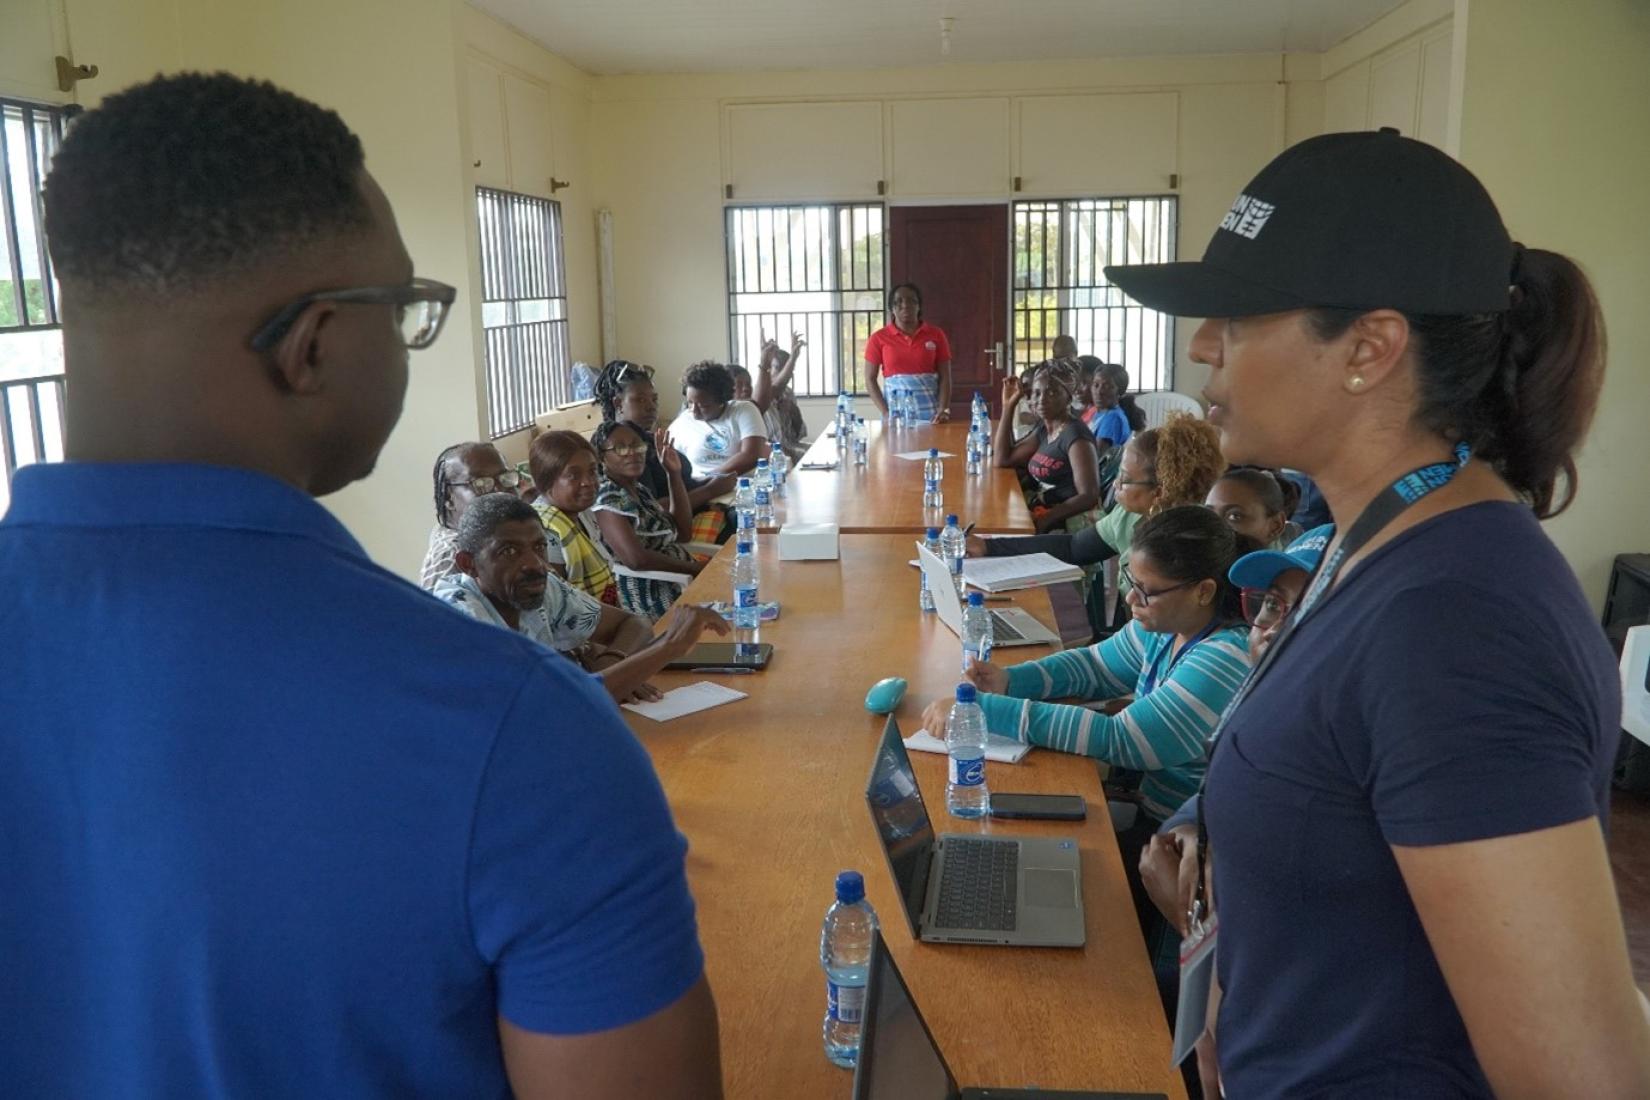 Je’nille Maraj, Planning Coordination Specialist at UN Women MCO Caribbean is aided by a translator to facilitate the focus group in Atjoni.